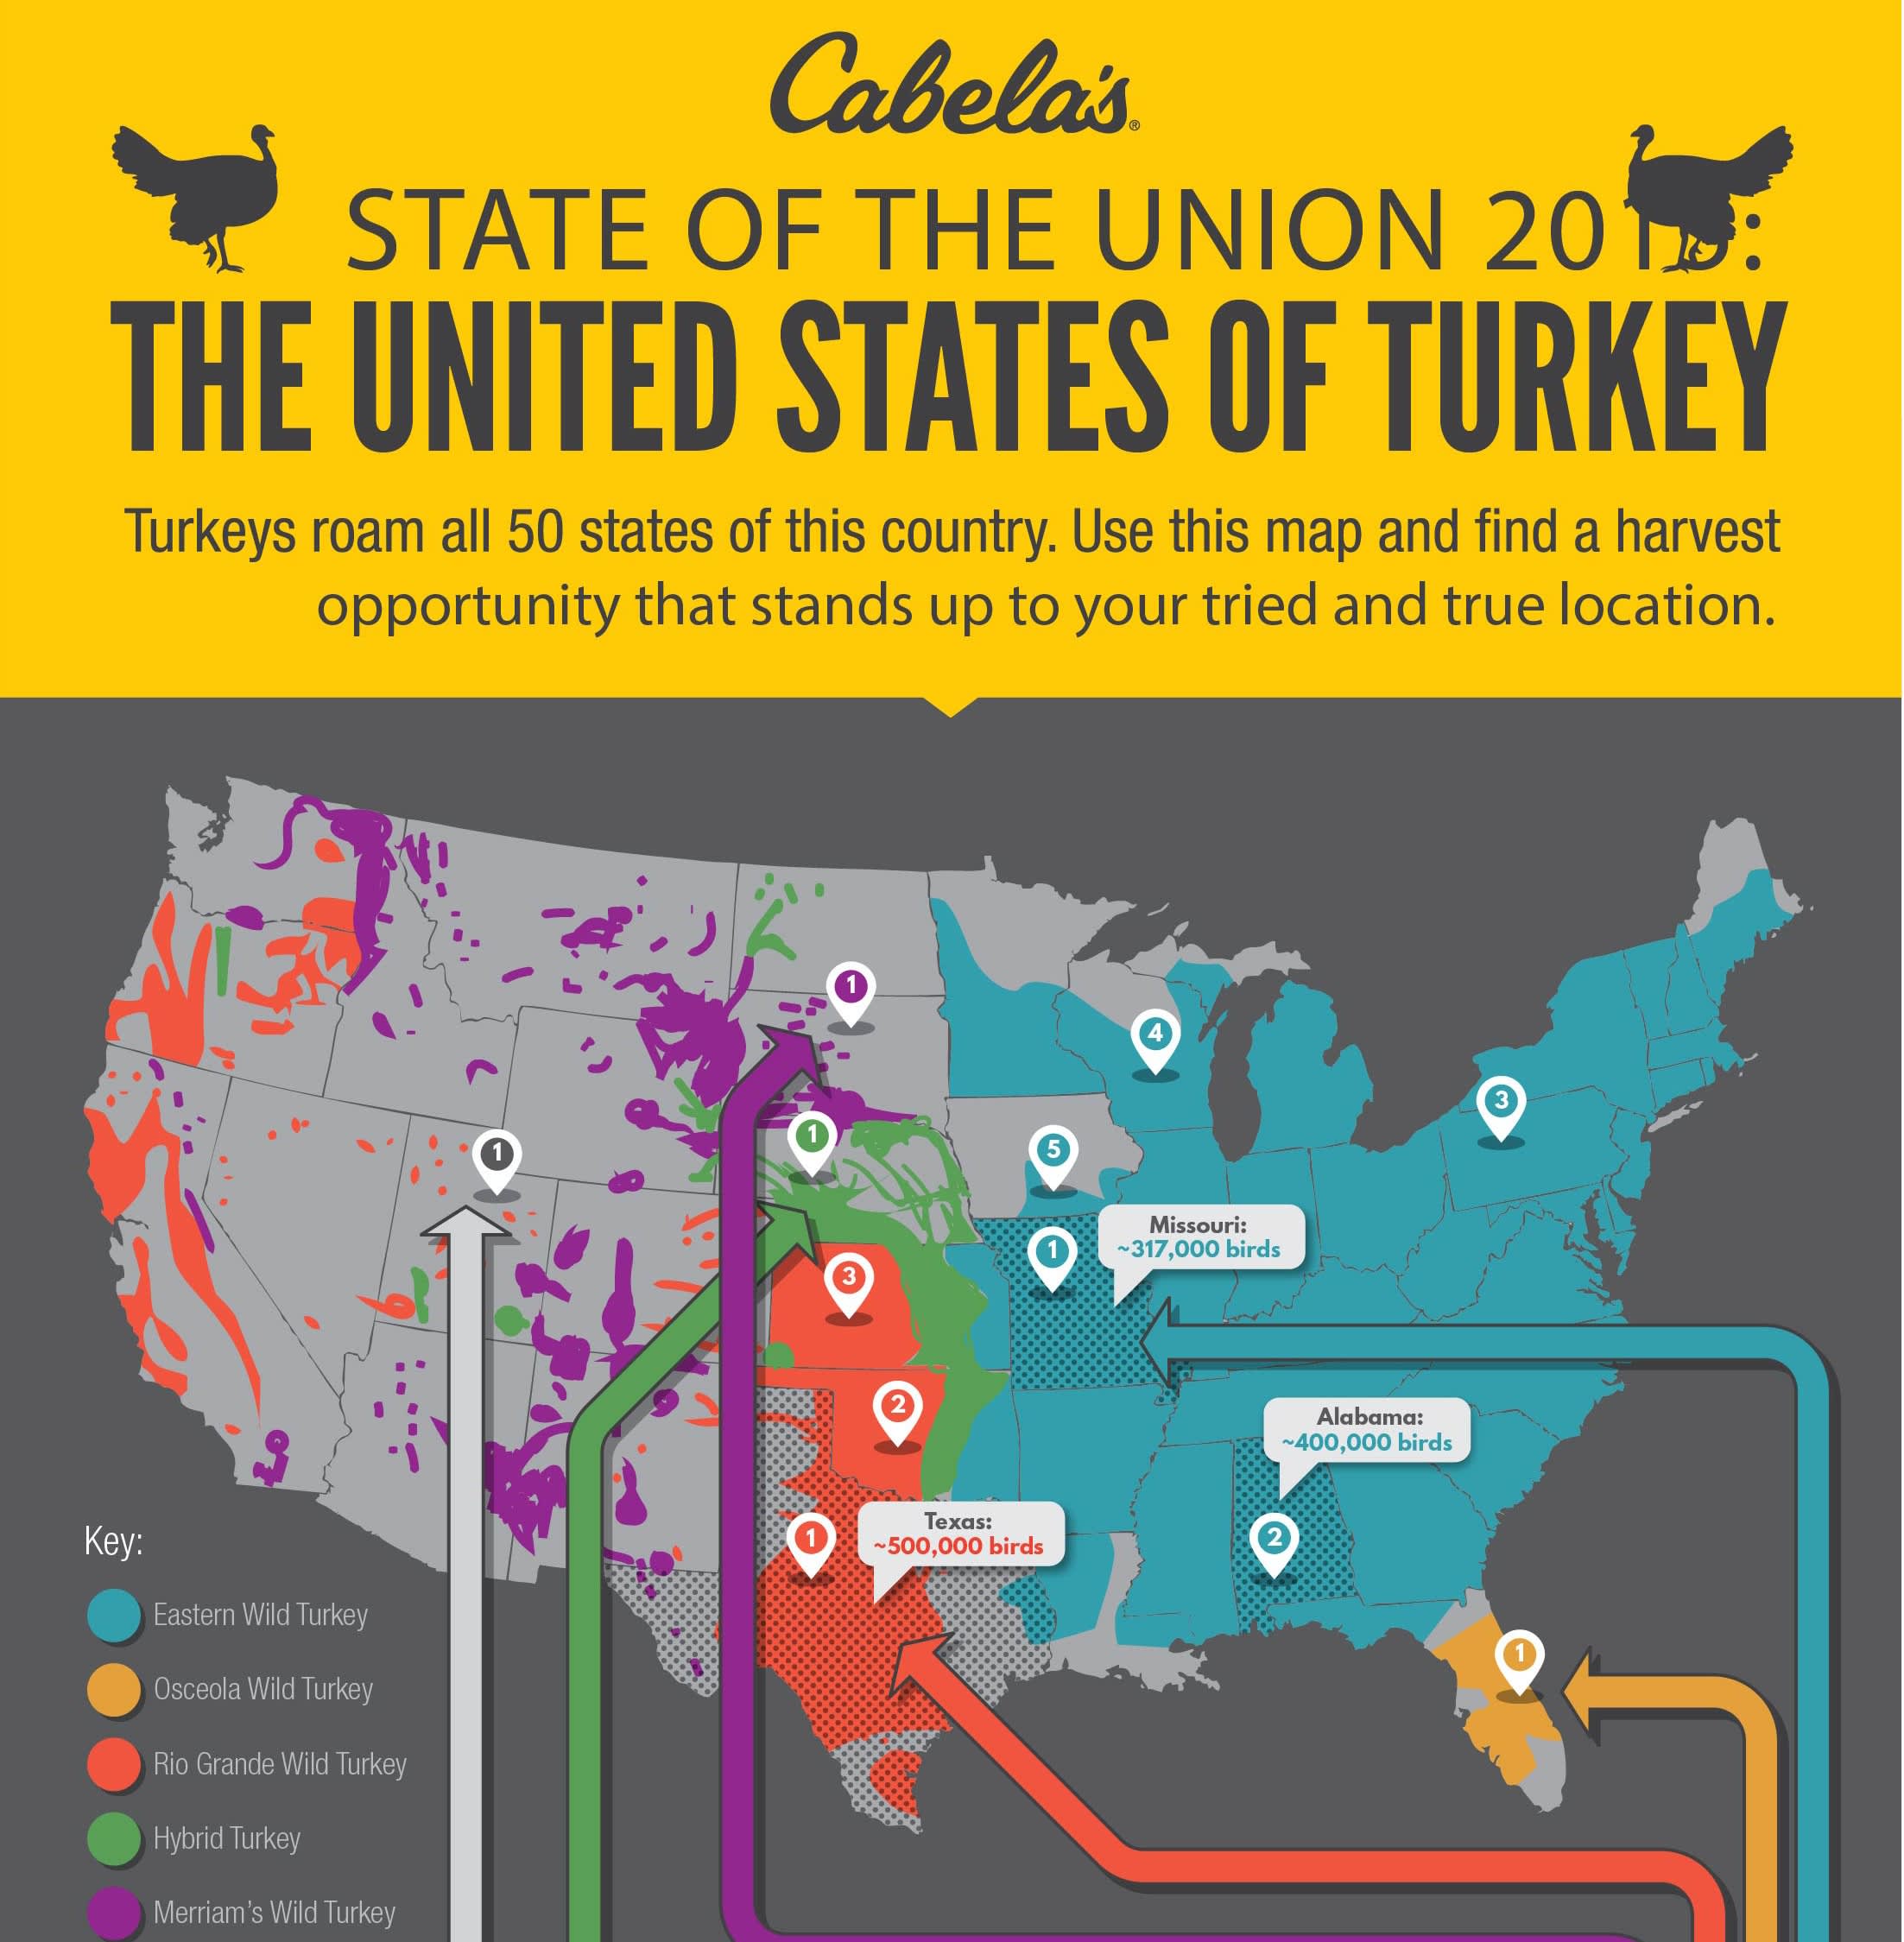 INFOGRAPHIC: The United States of Turkey Hunting